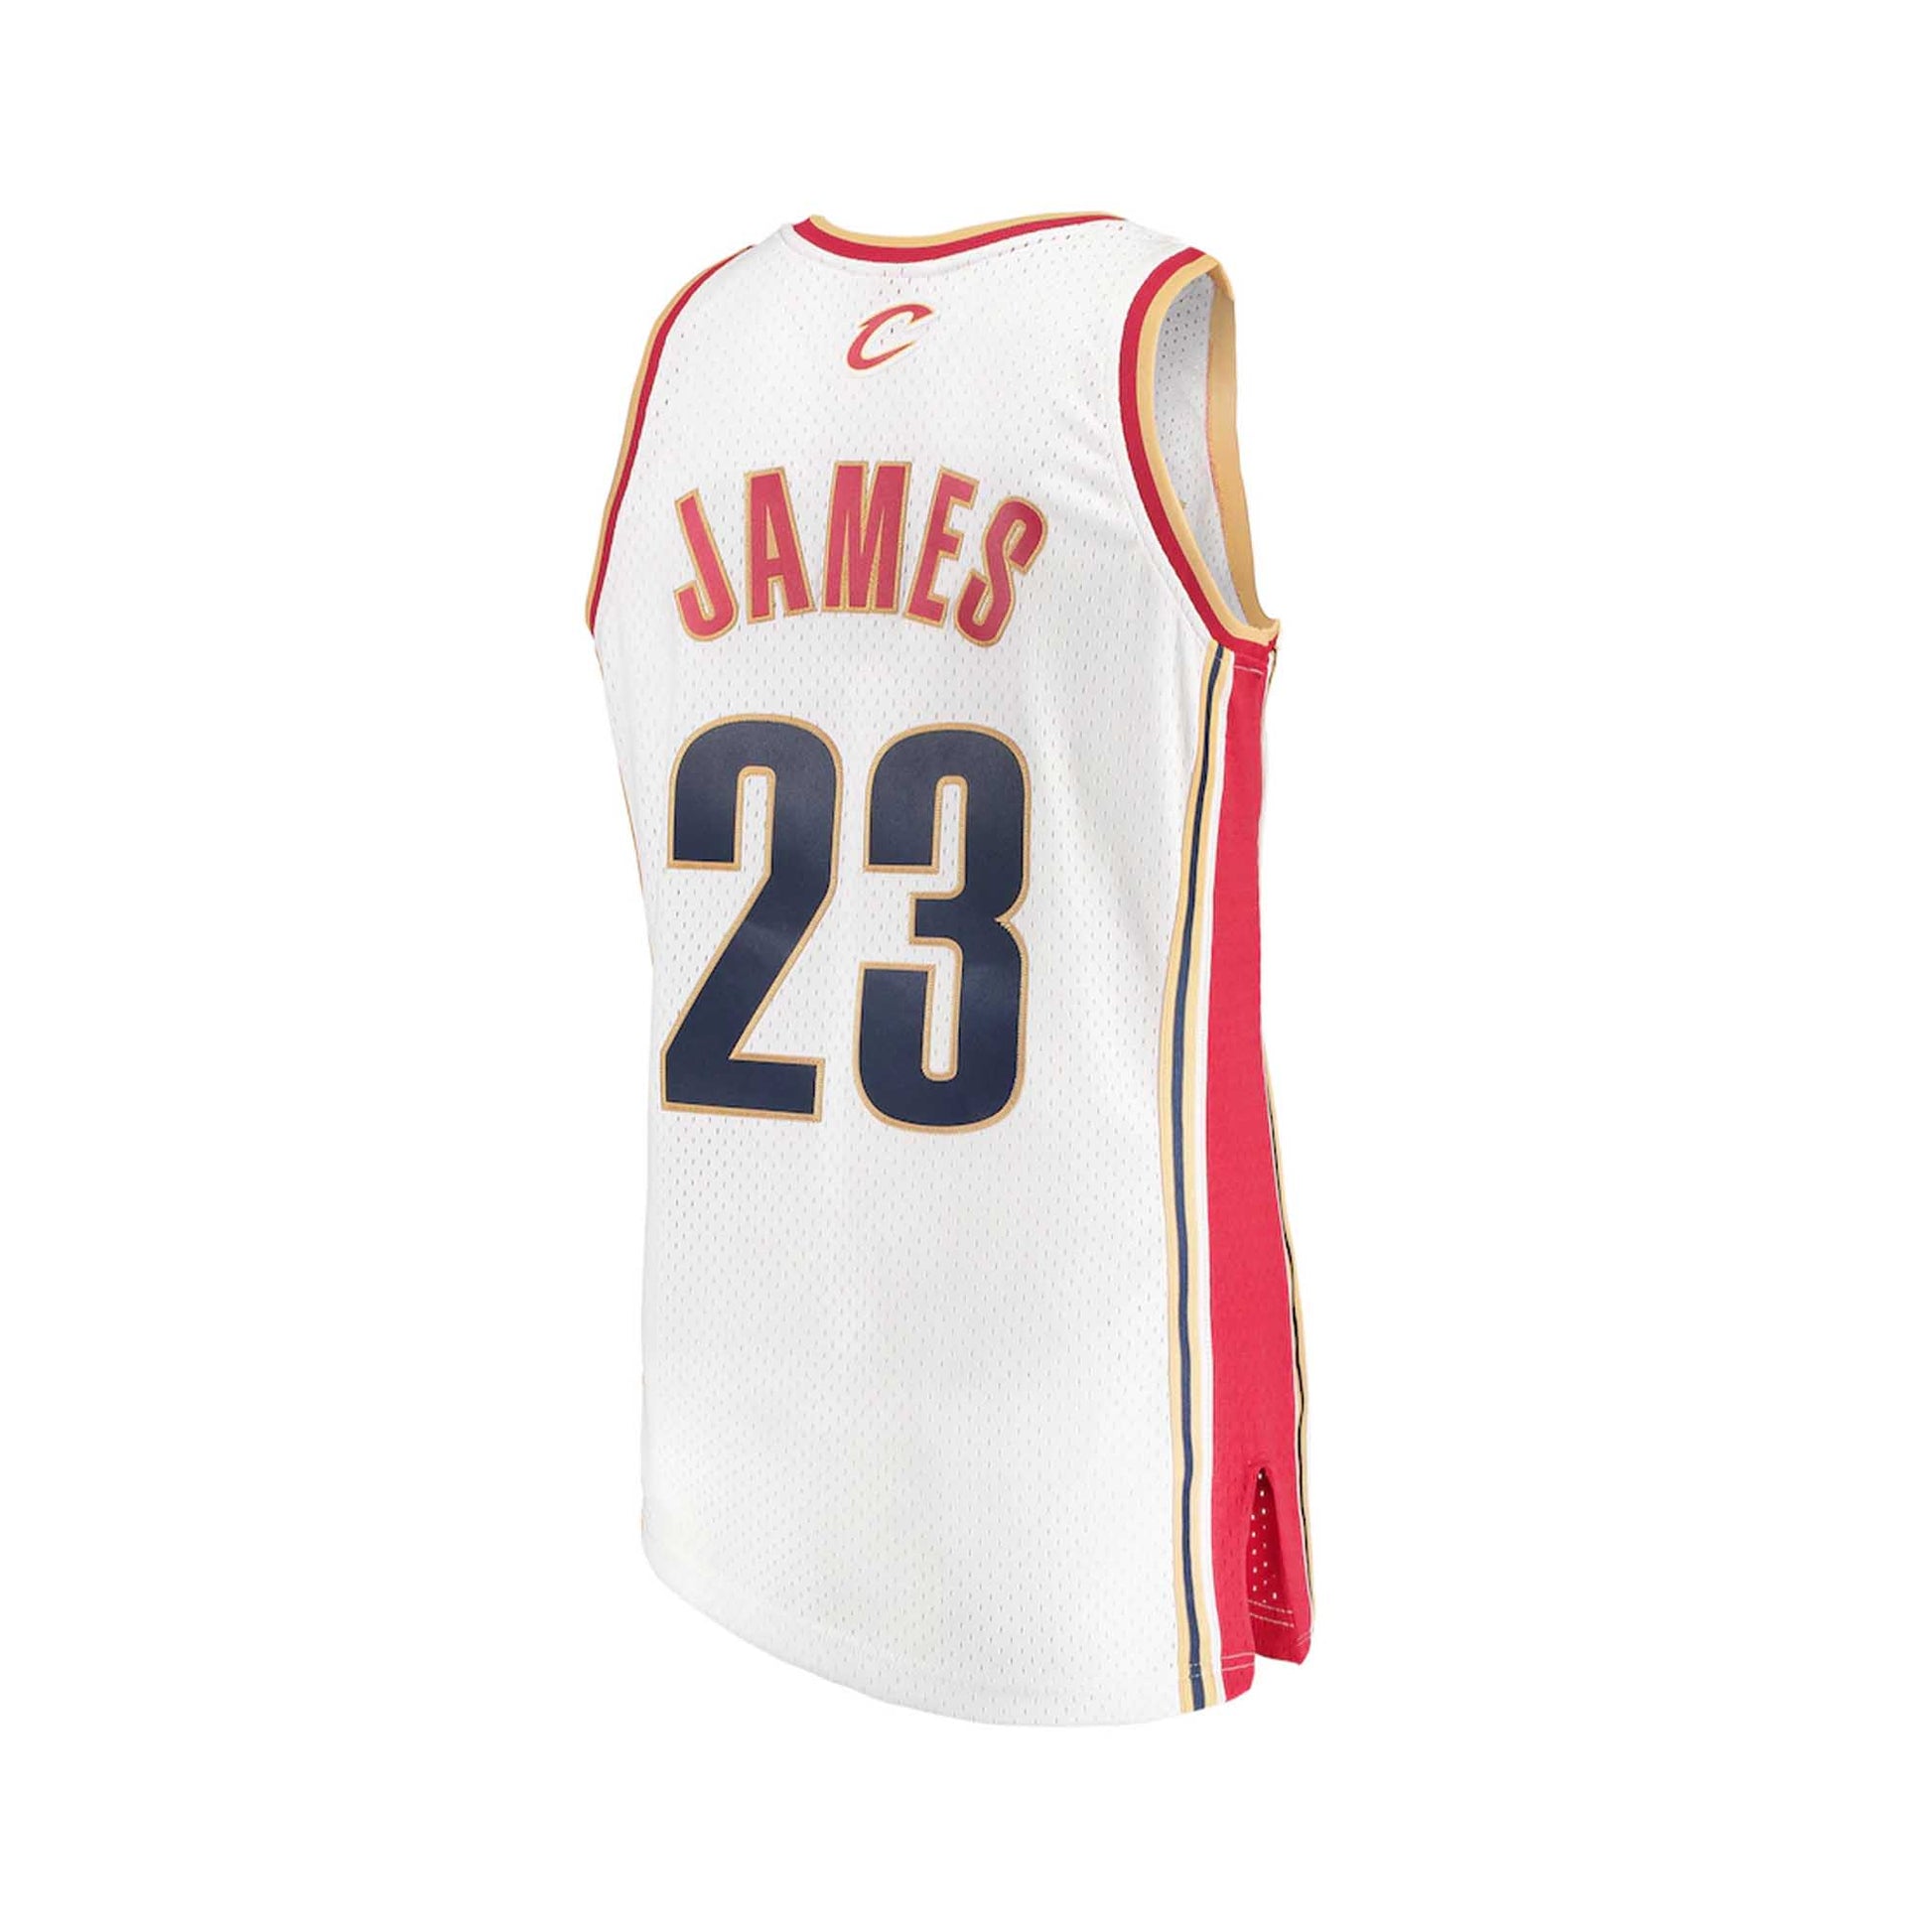 lebron old jersey